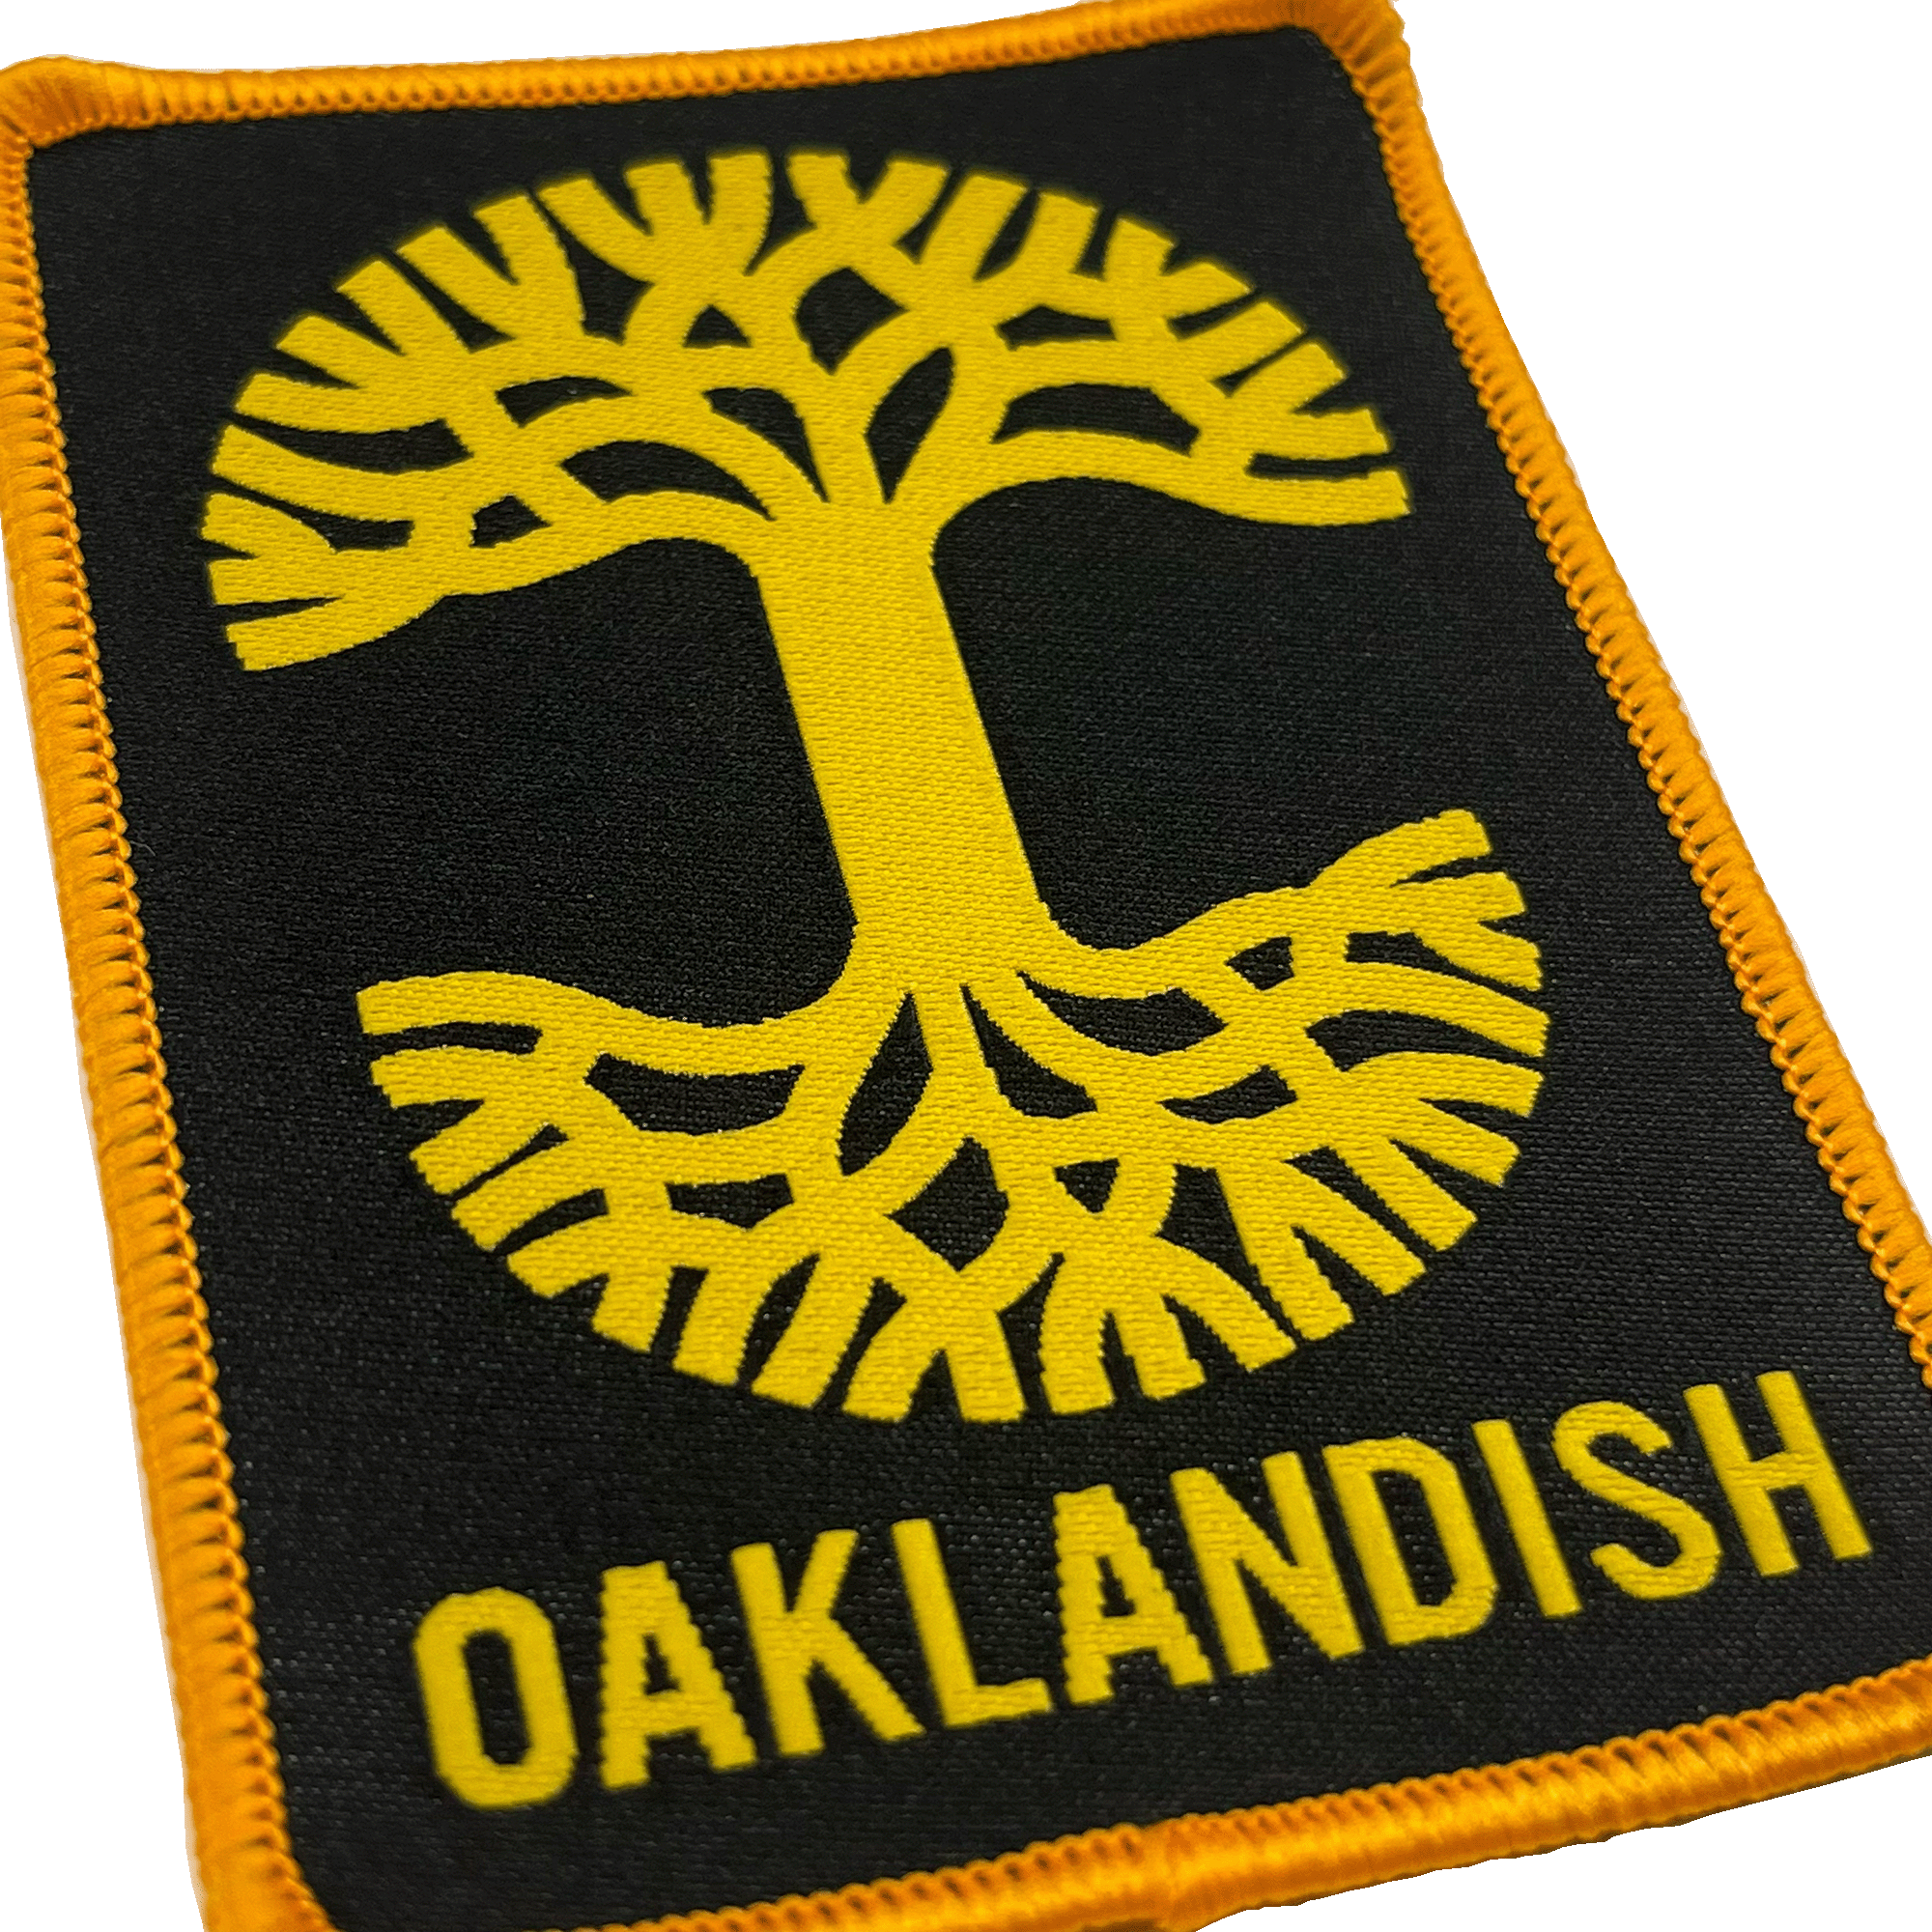 Close-up of black woven iron-on patch with gold Oaklandish tree logo and wordmark.